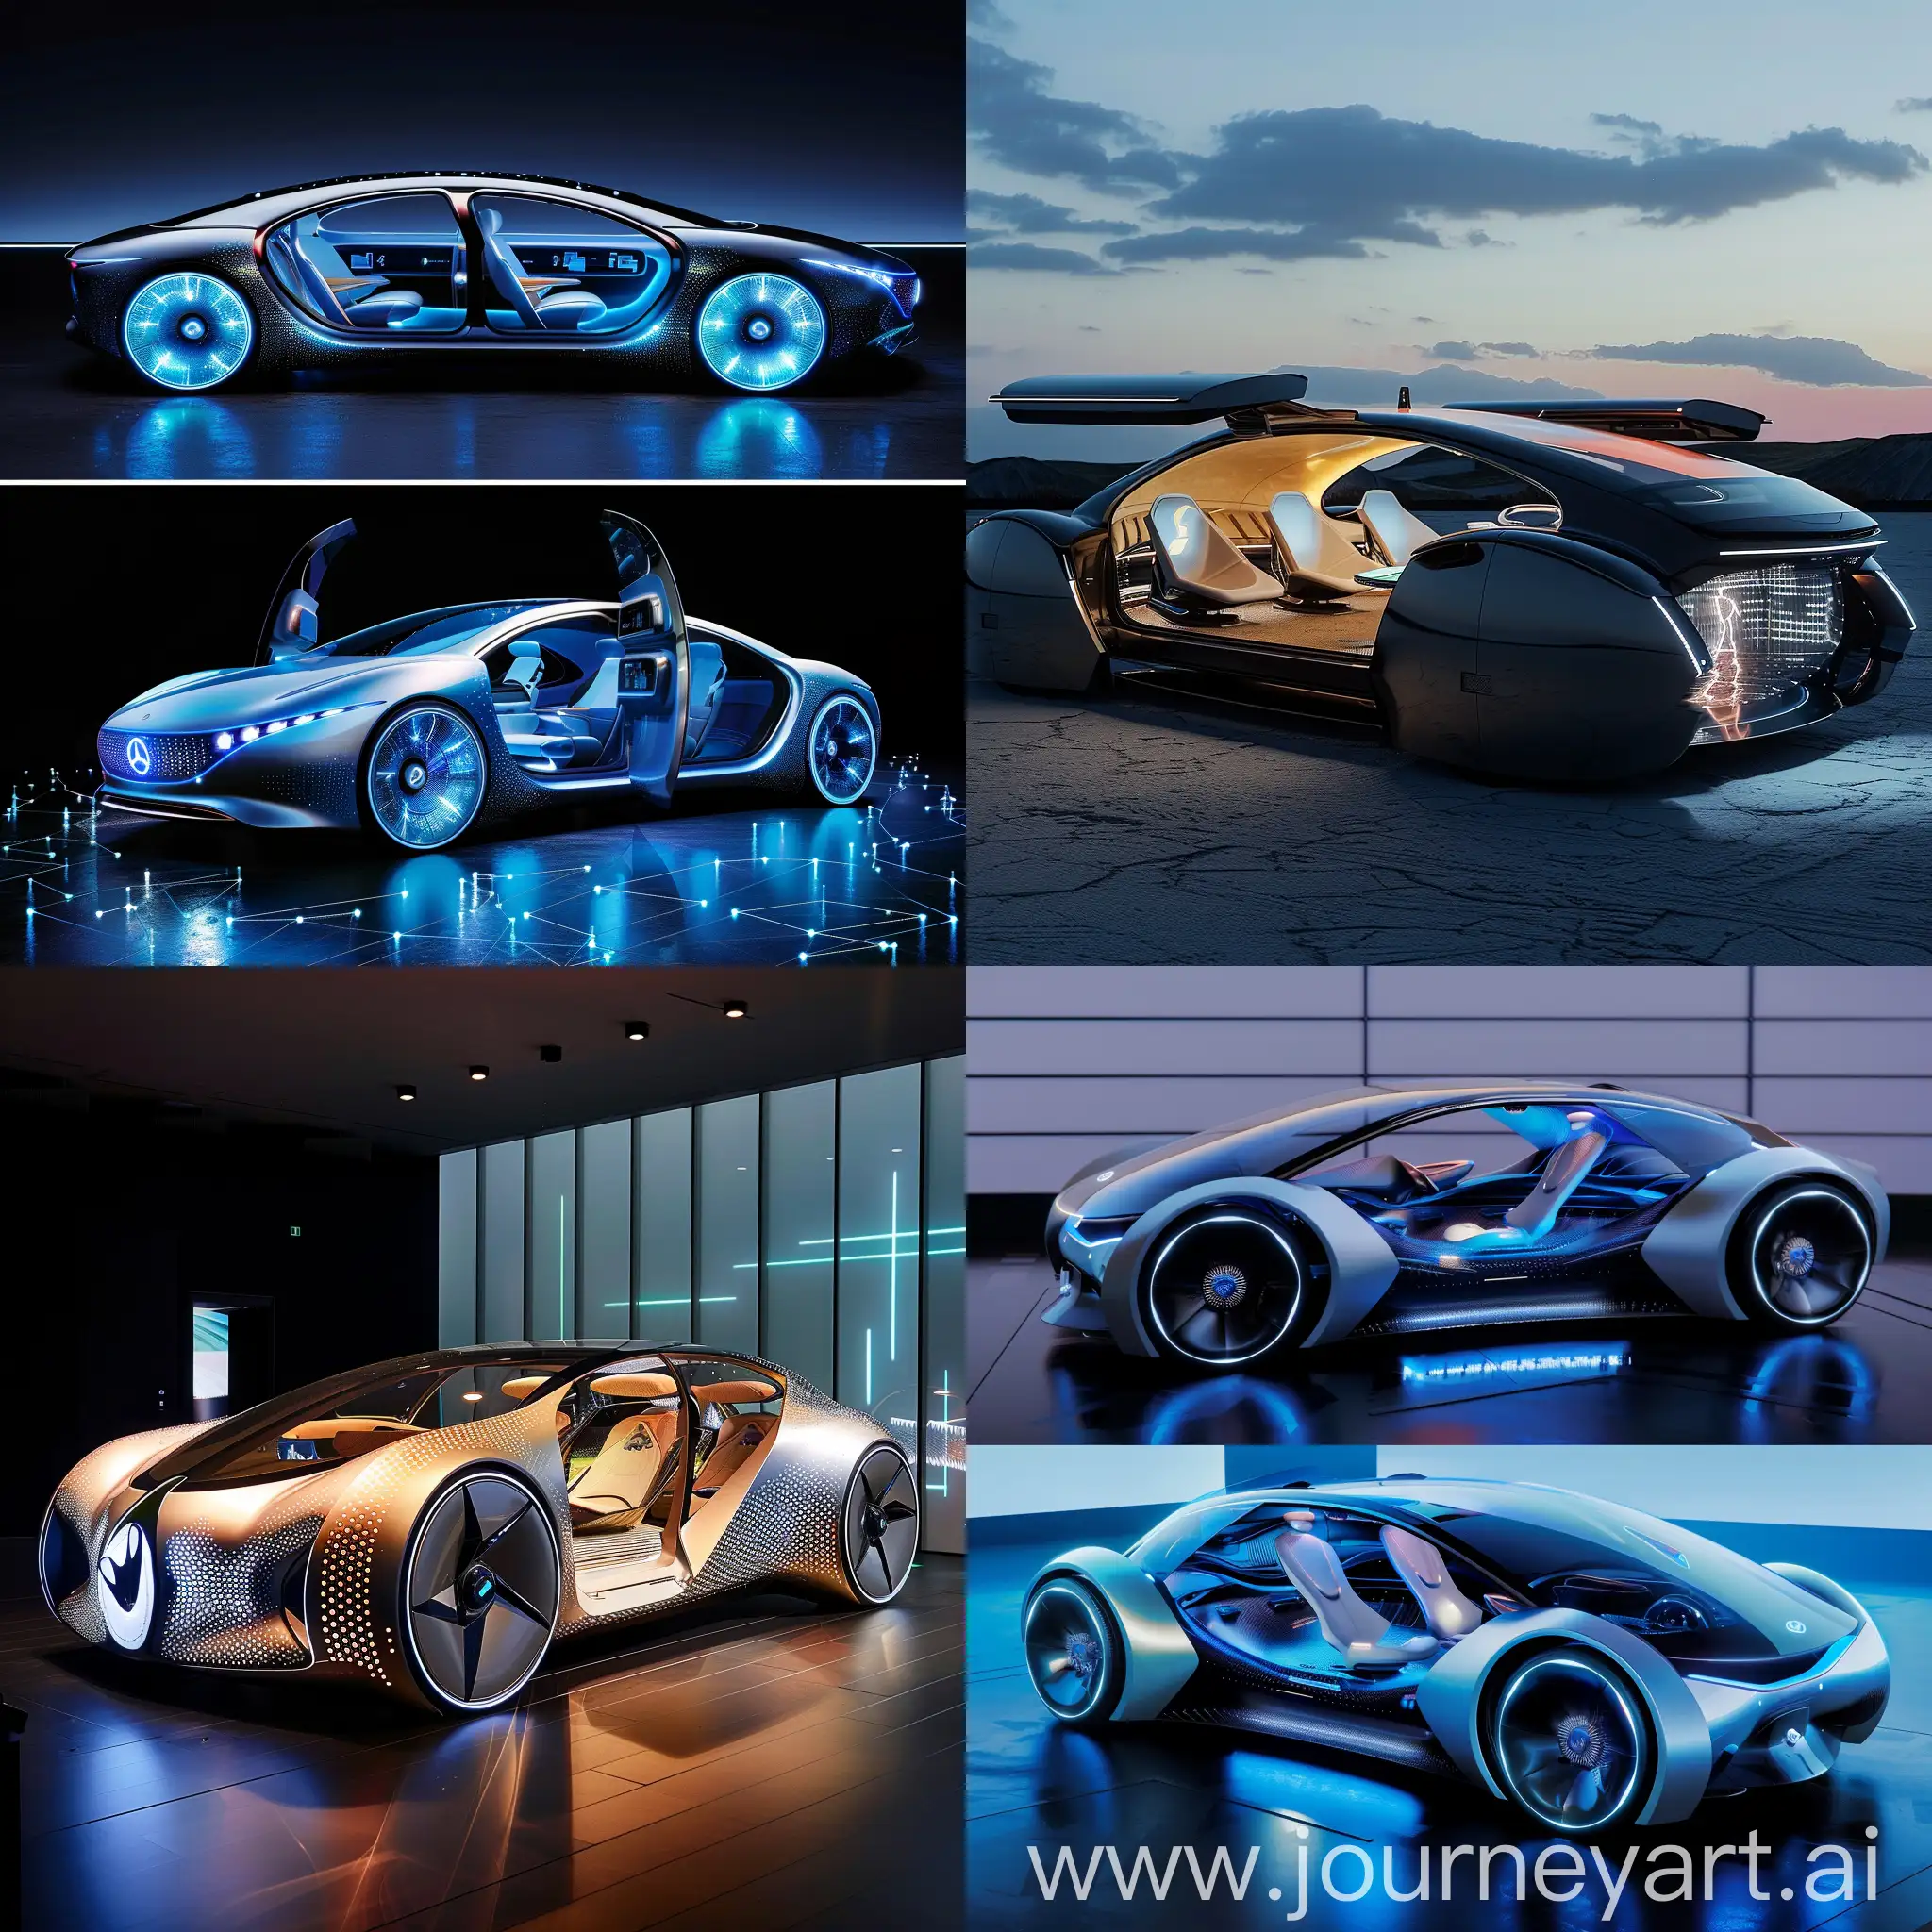 Futuristic car, Panoramic Transparent Displays, Biometric Recognition and Customization, AI-powered Climate Control, Interactive Seating, Augmented Reality Navigation, Sustainable and Recycled Materials, Modular Interior Design, Voice-activated Controls, Interactive Ambient Lighting, "Living" Interiors with Biomimicry, Aerodynamic, Streamlined Forms, Kinetic Exterior Panels, Transparent or Switchable Glass Materials, Integrated Lighting Systems, Active Aero Elements, Retractable or Extendable Components, Wheelsets with Integrated Features, Holographic Displays and Projections, Multi-layered or Kinetic Paint Jobs, Sustainable Materials and Construction Techniques, in high tech style, in unreal engine 5 style --stylize 1000